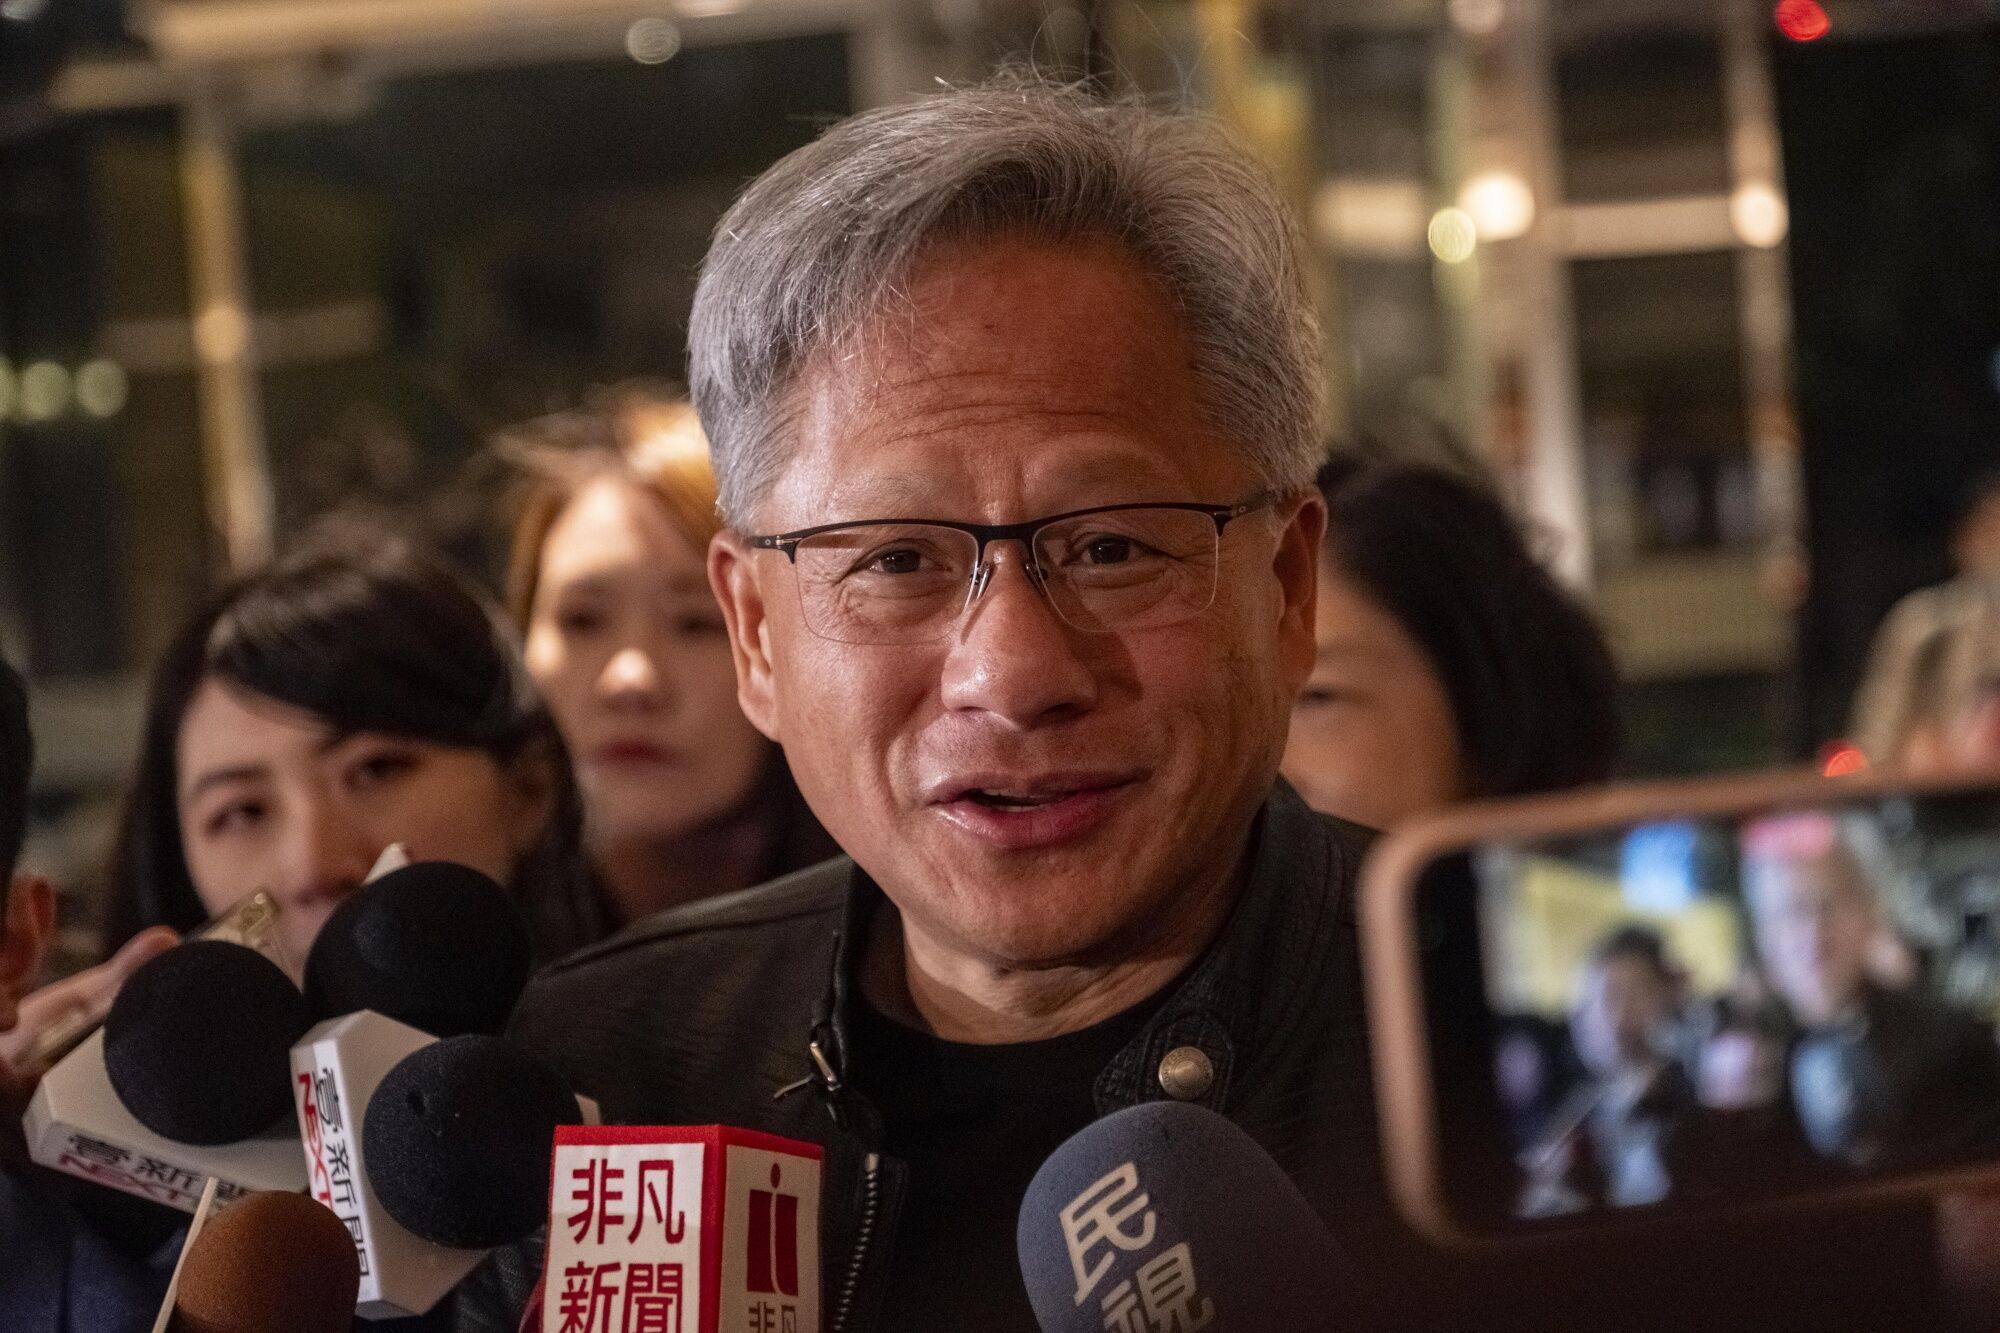 Jensen Huang, co-founder and CEO of Nvidia, arrived at an event in Taipei on Thursday, surrounded by media. Photo: Bloomberg